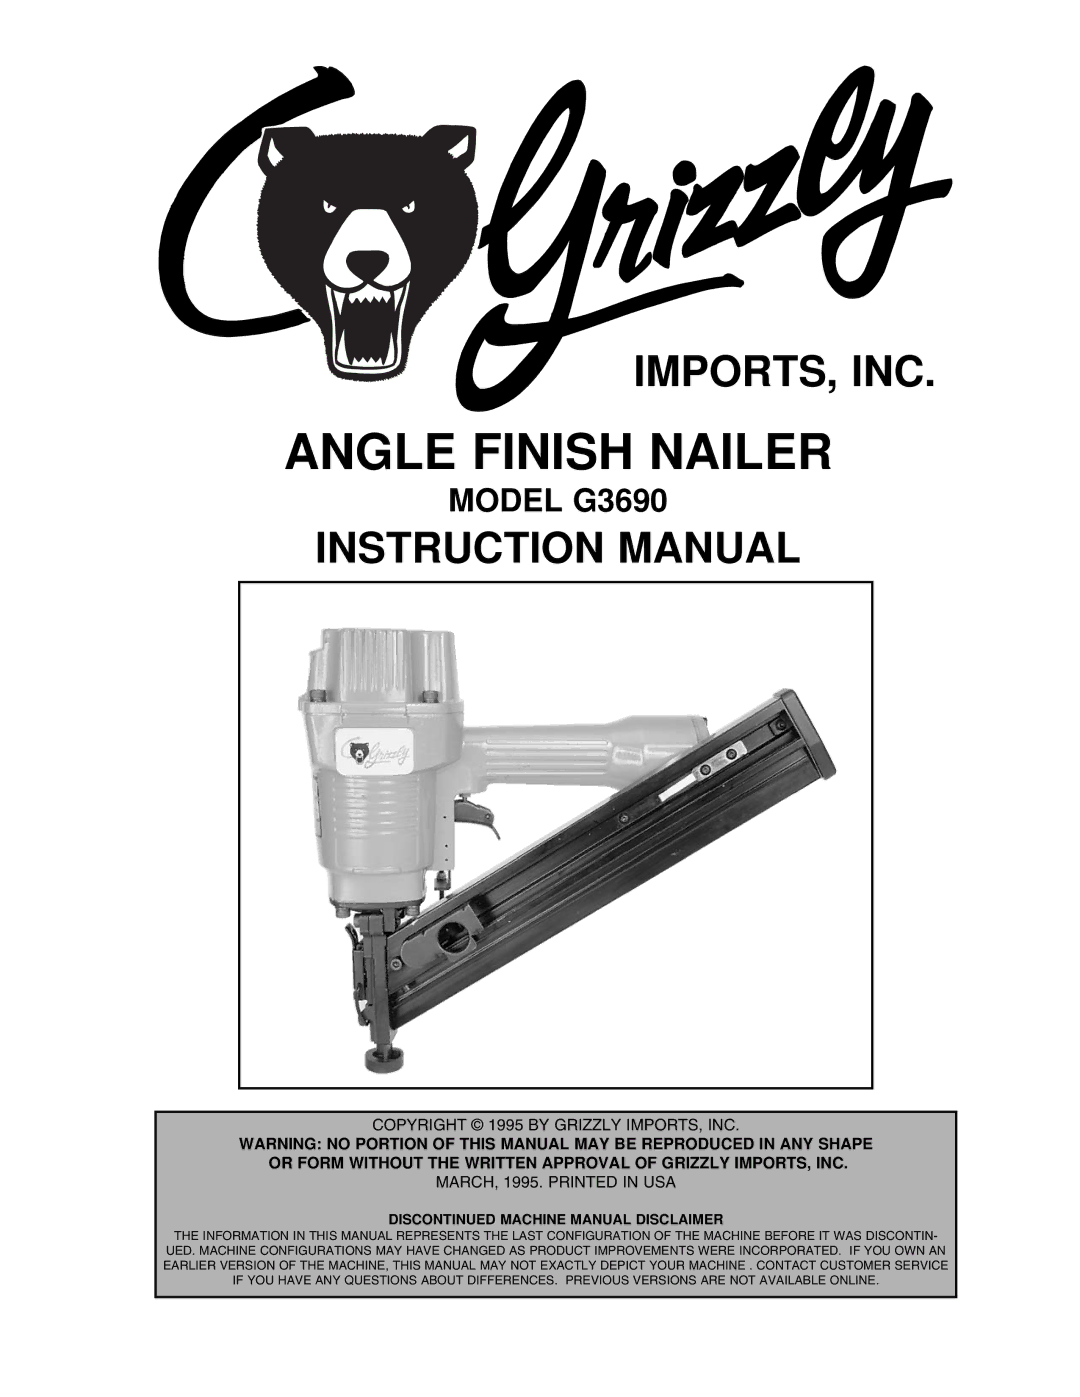 Grizzly instruction manual Angle Finish Nailer, Model G3690 